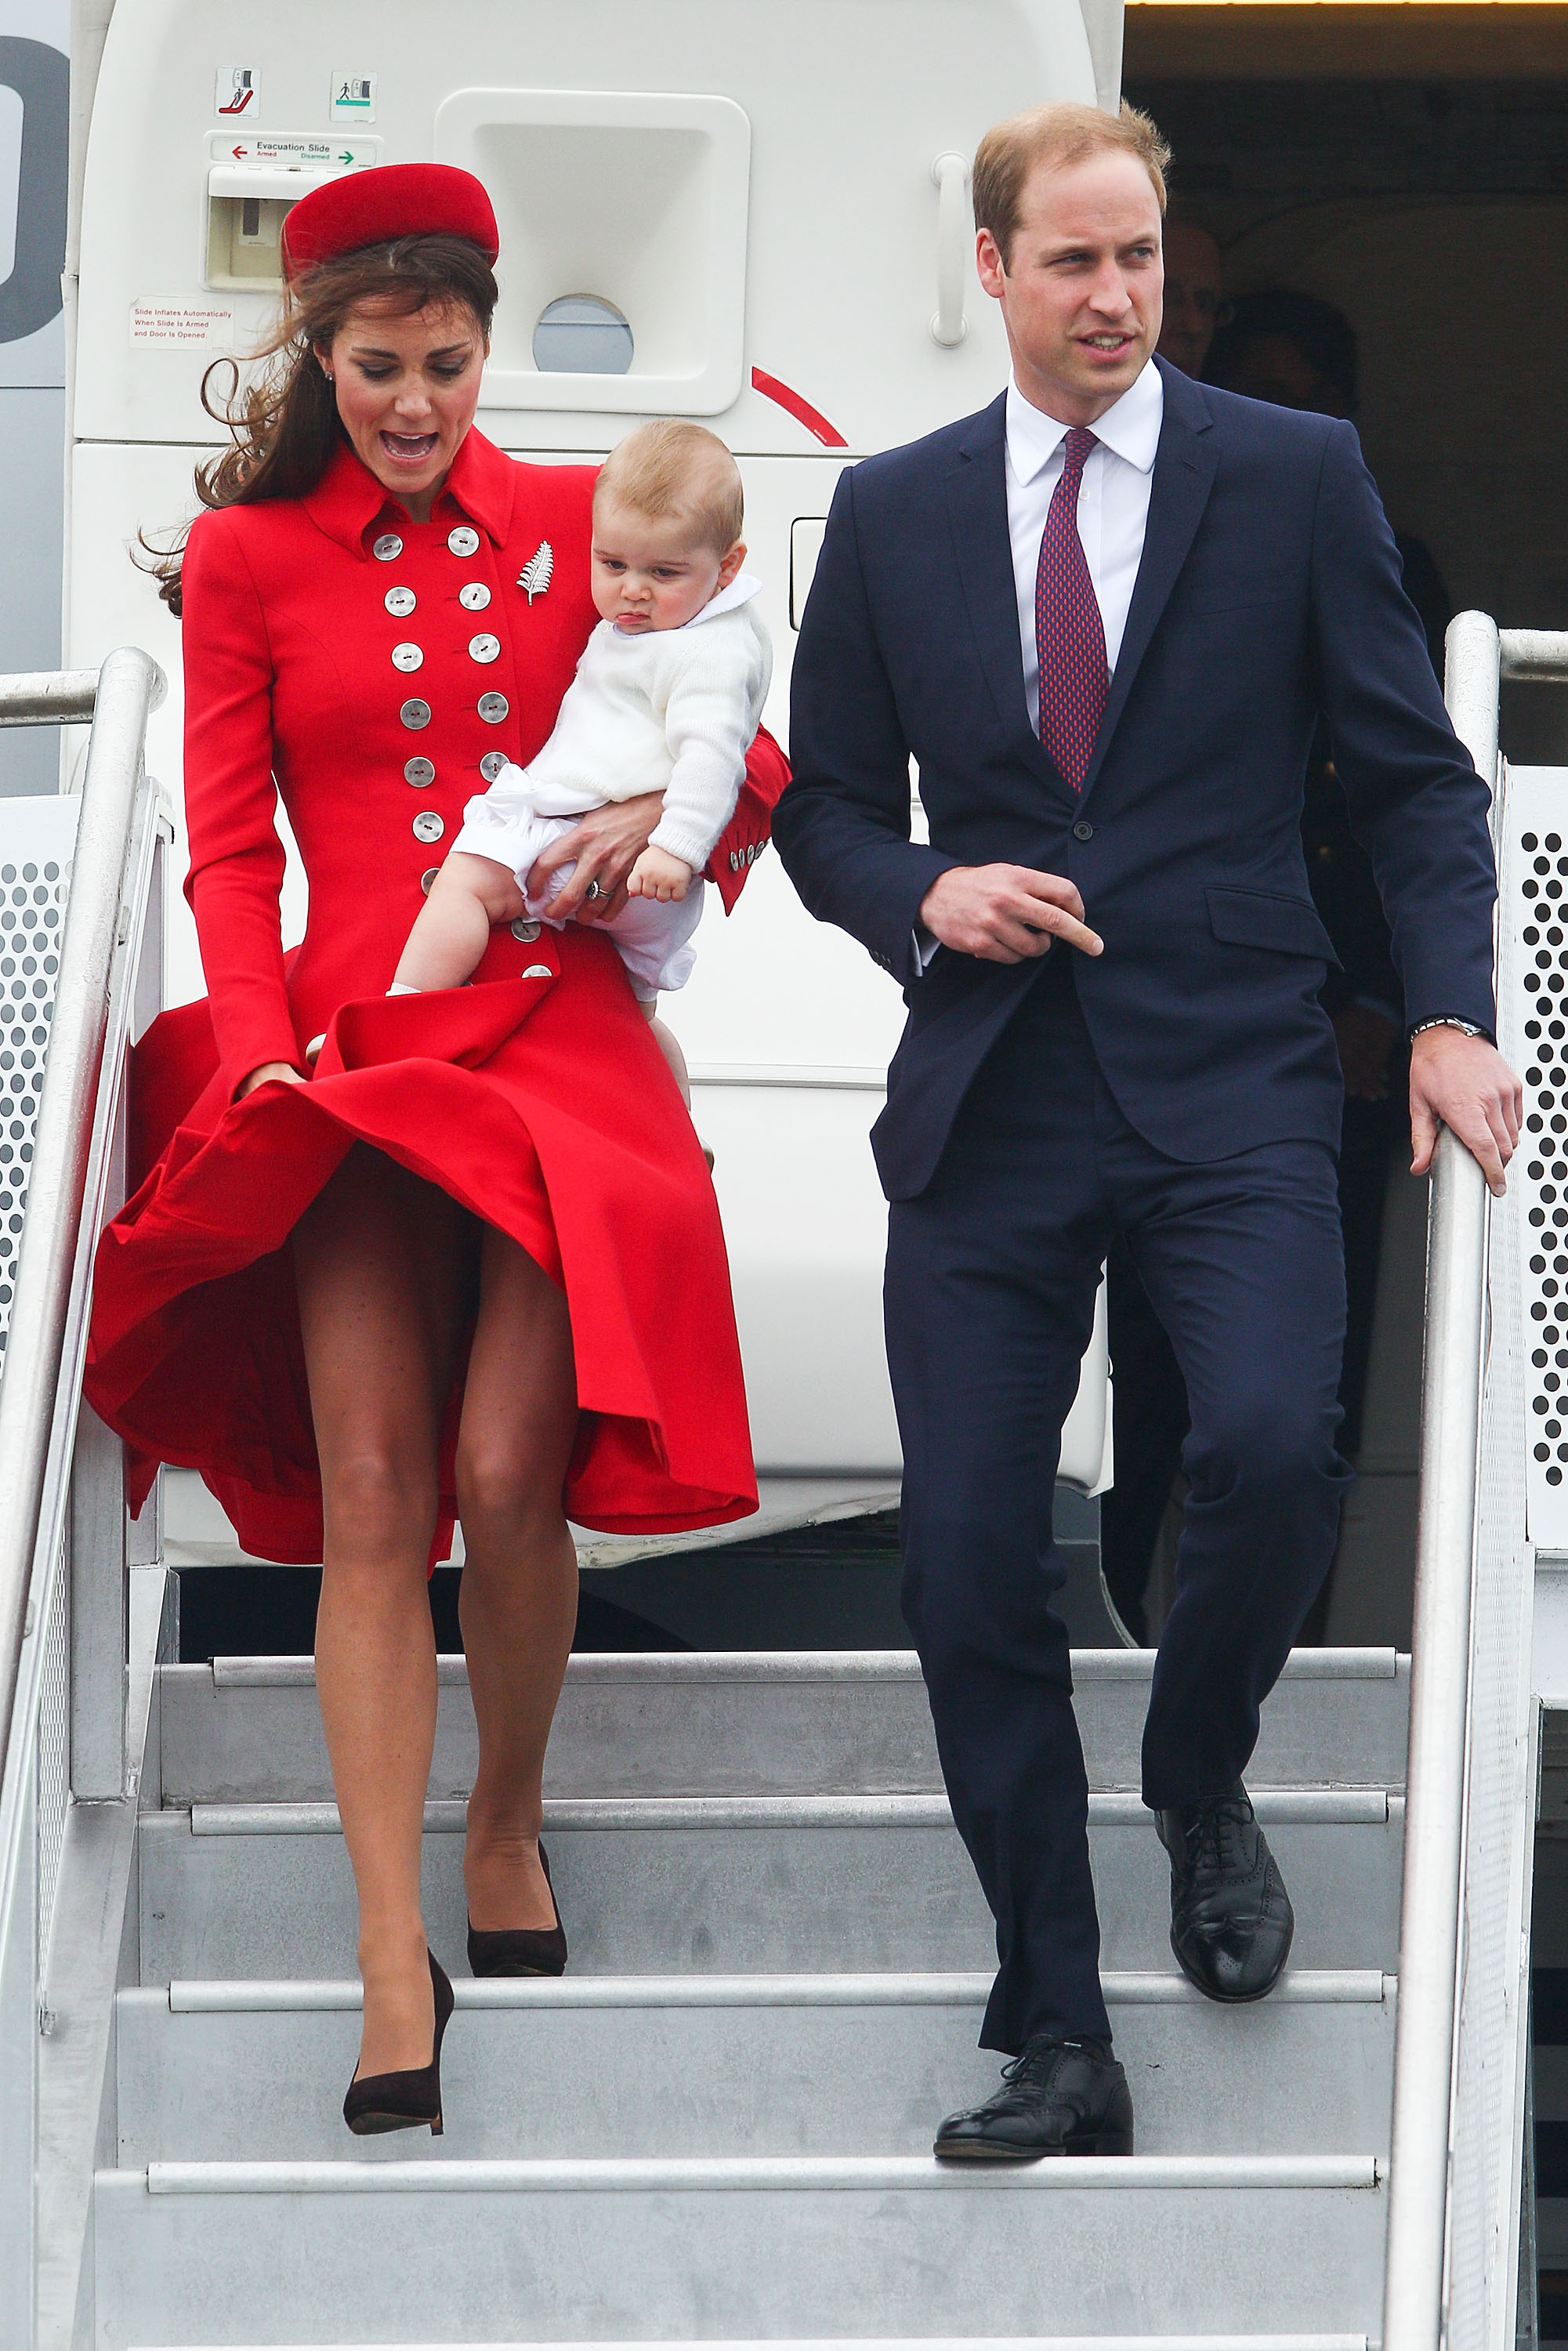 camron pete recommends Princess Kate Upskirt